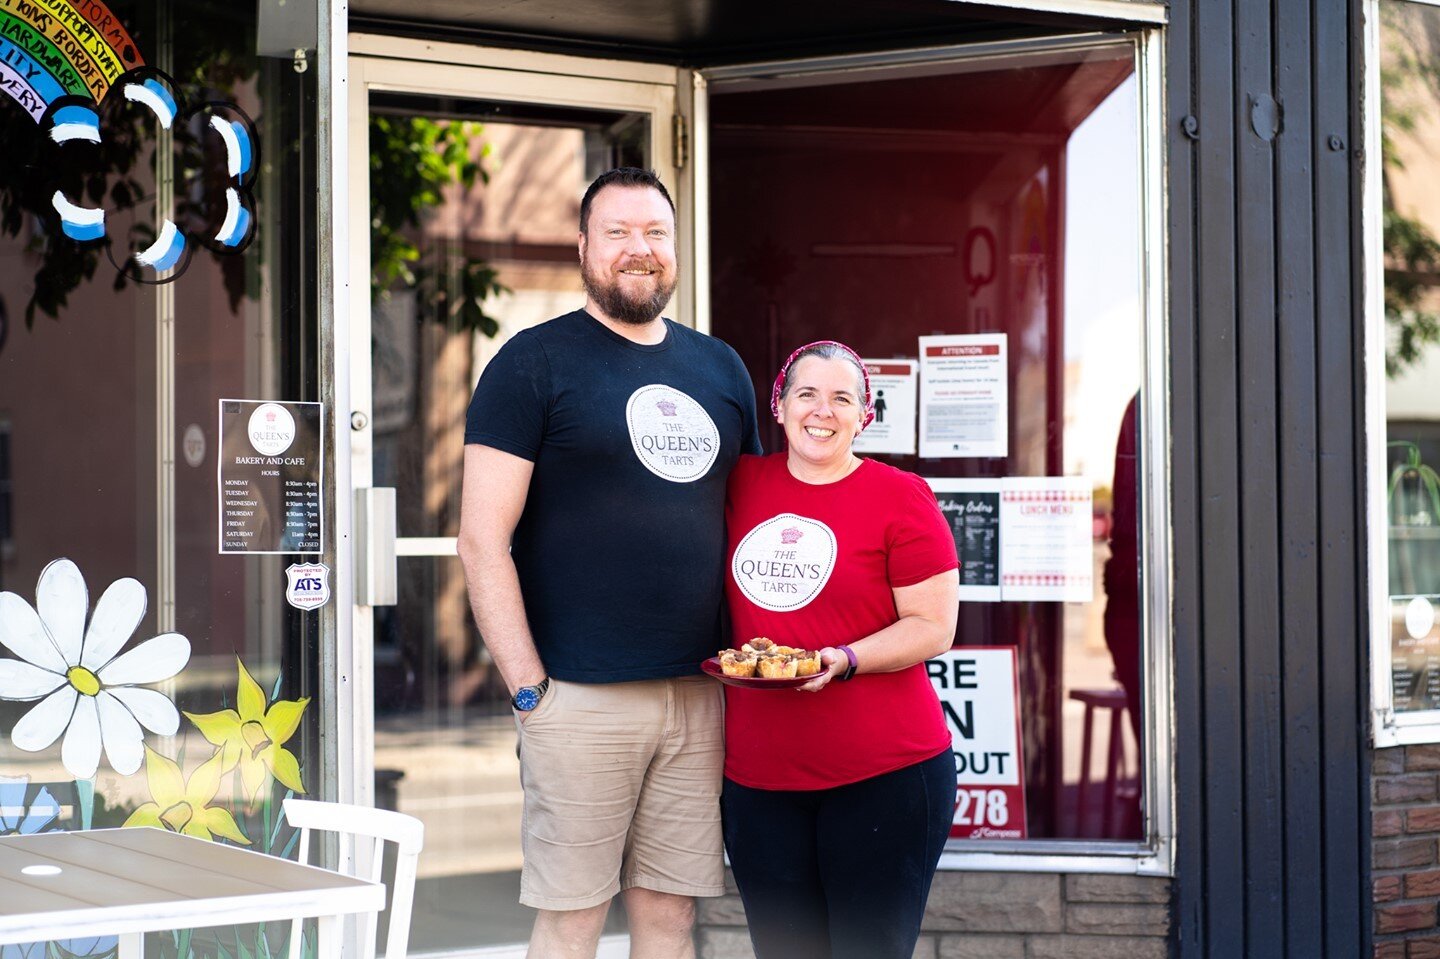 Meet the wonderful people behind The Queen's Tarts! &hearts;️

The Queen's Tarts is local bakery &amp; cafe located downtown in Sault Ste. Marie. Each day they feature handcrafted, gourmet butter tarts with an array of flavours. 
 
Tammy is known as 